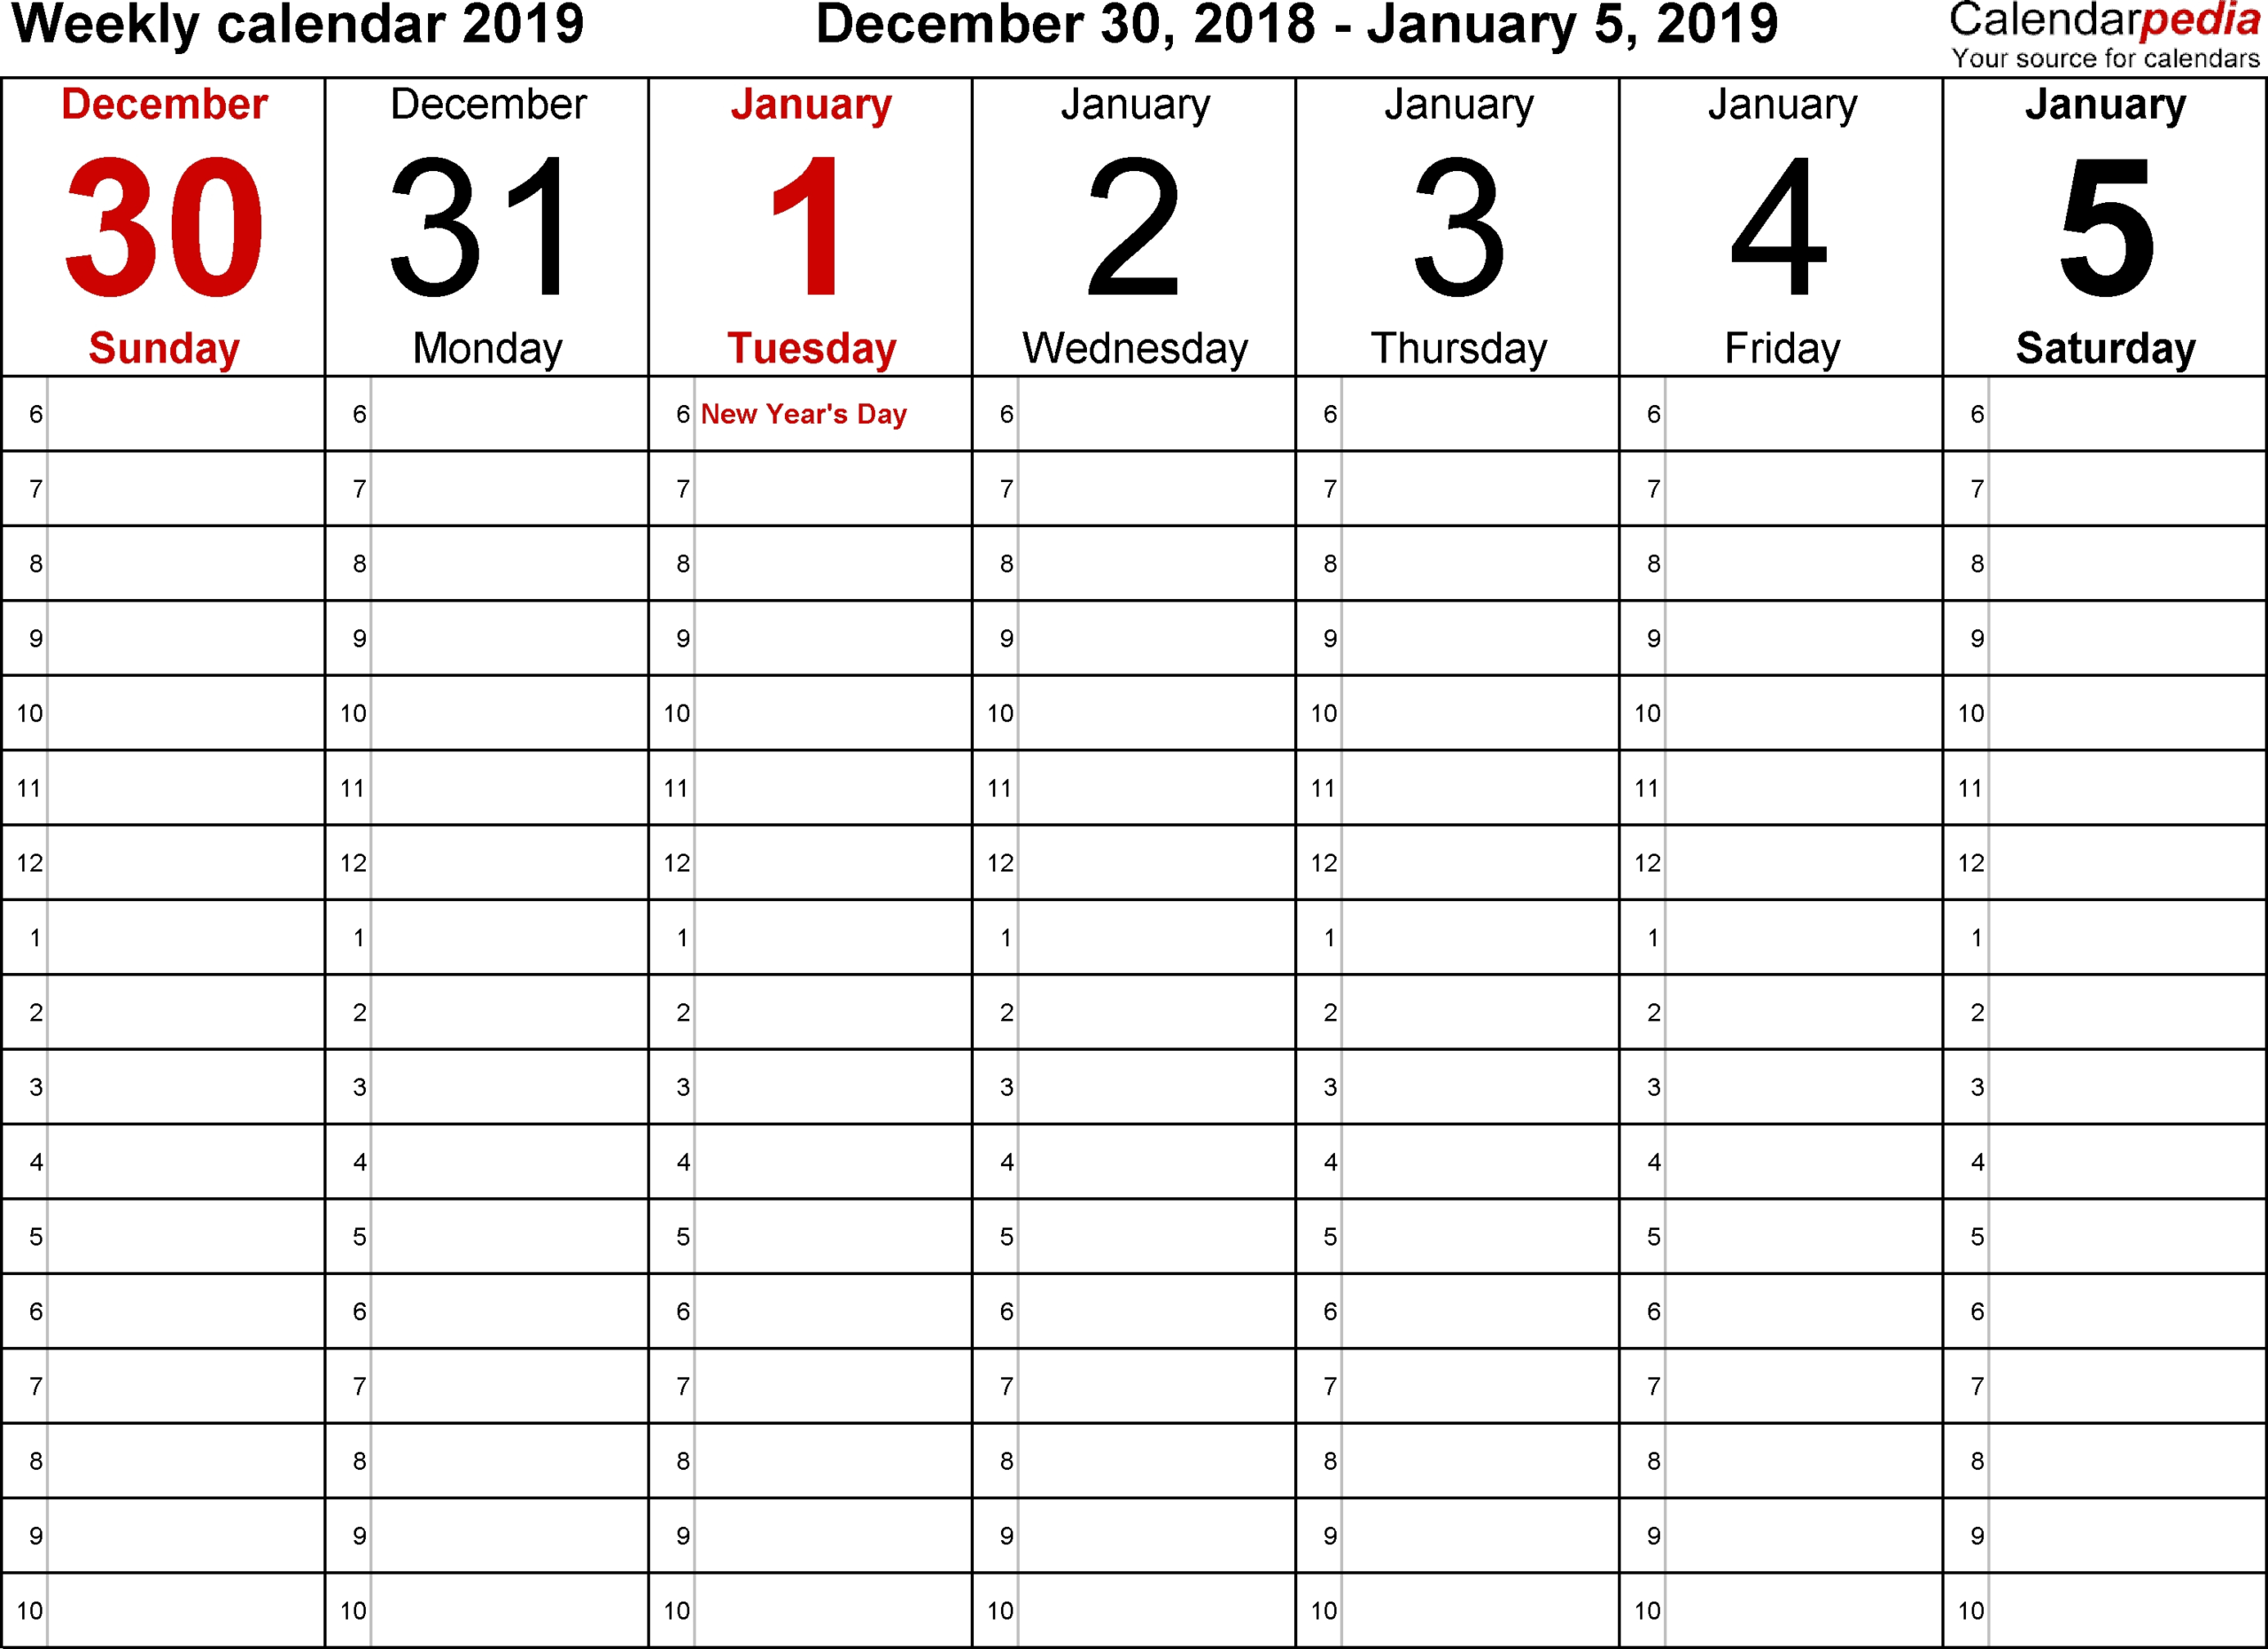 Blank Calendars To Print With Time Slots - Calendar  Time Printable Calendar Time Slot